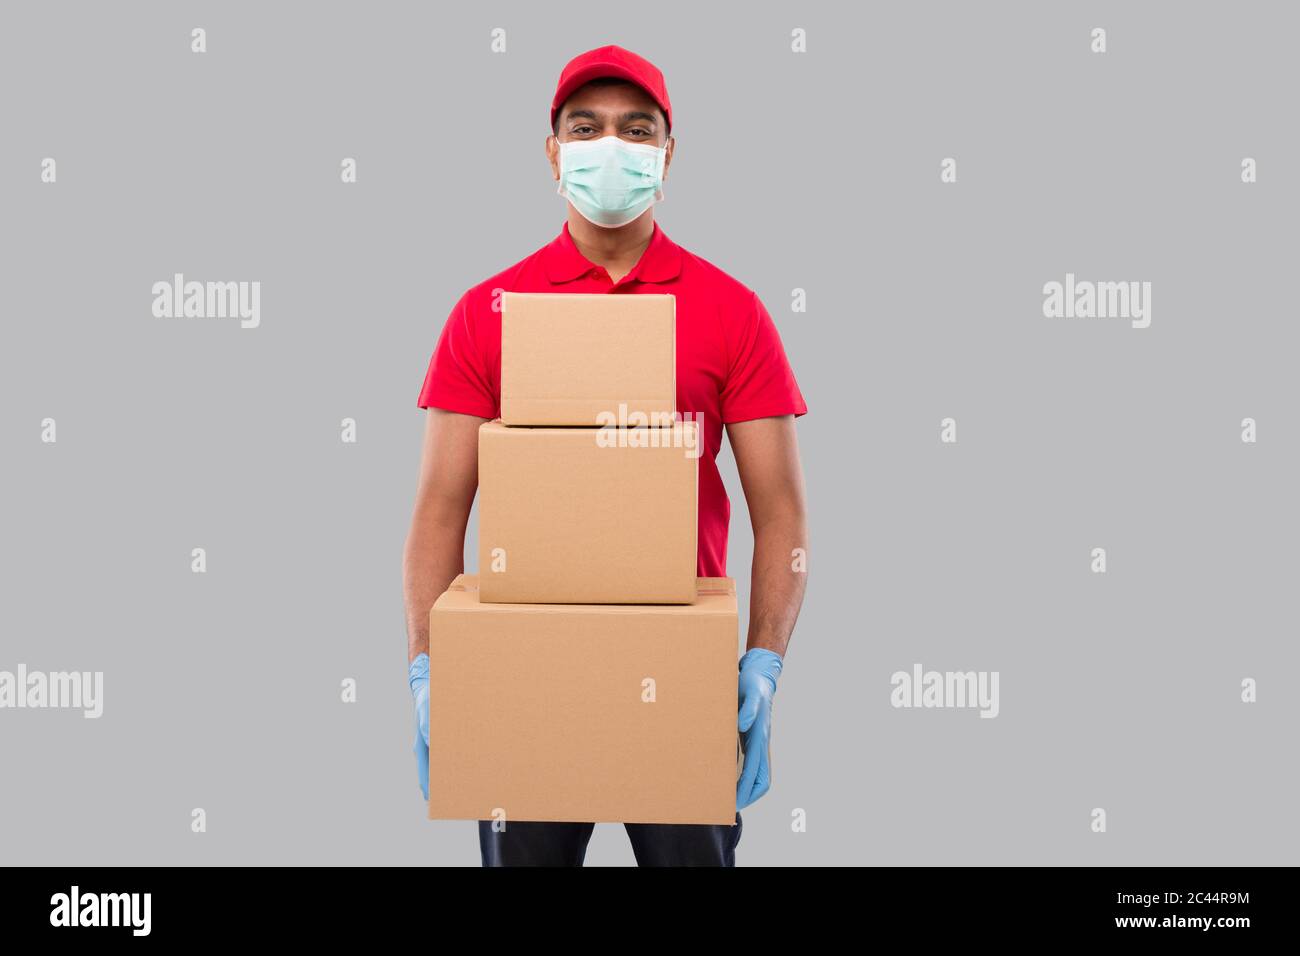 Delivery Man Holding Carton Boxes WEaring Medical Mask and Gloves Isolated. Indian Delivery Boy Smiling with Boxes in Hands Stock Photo